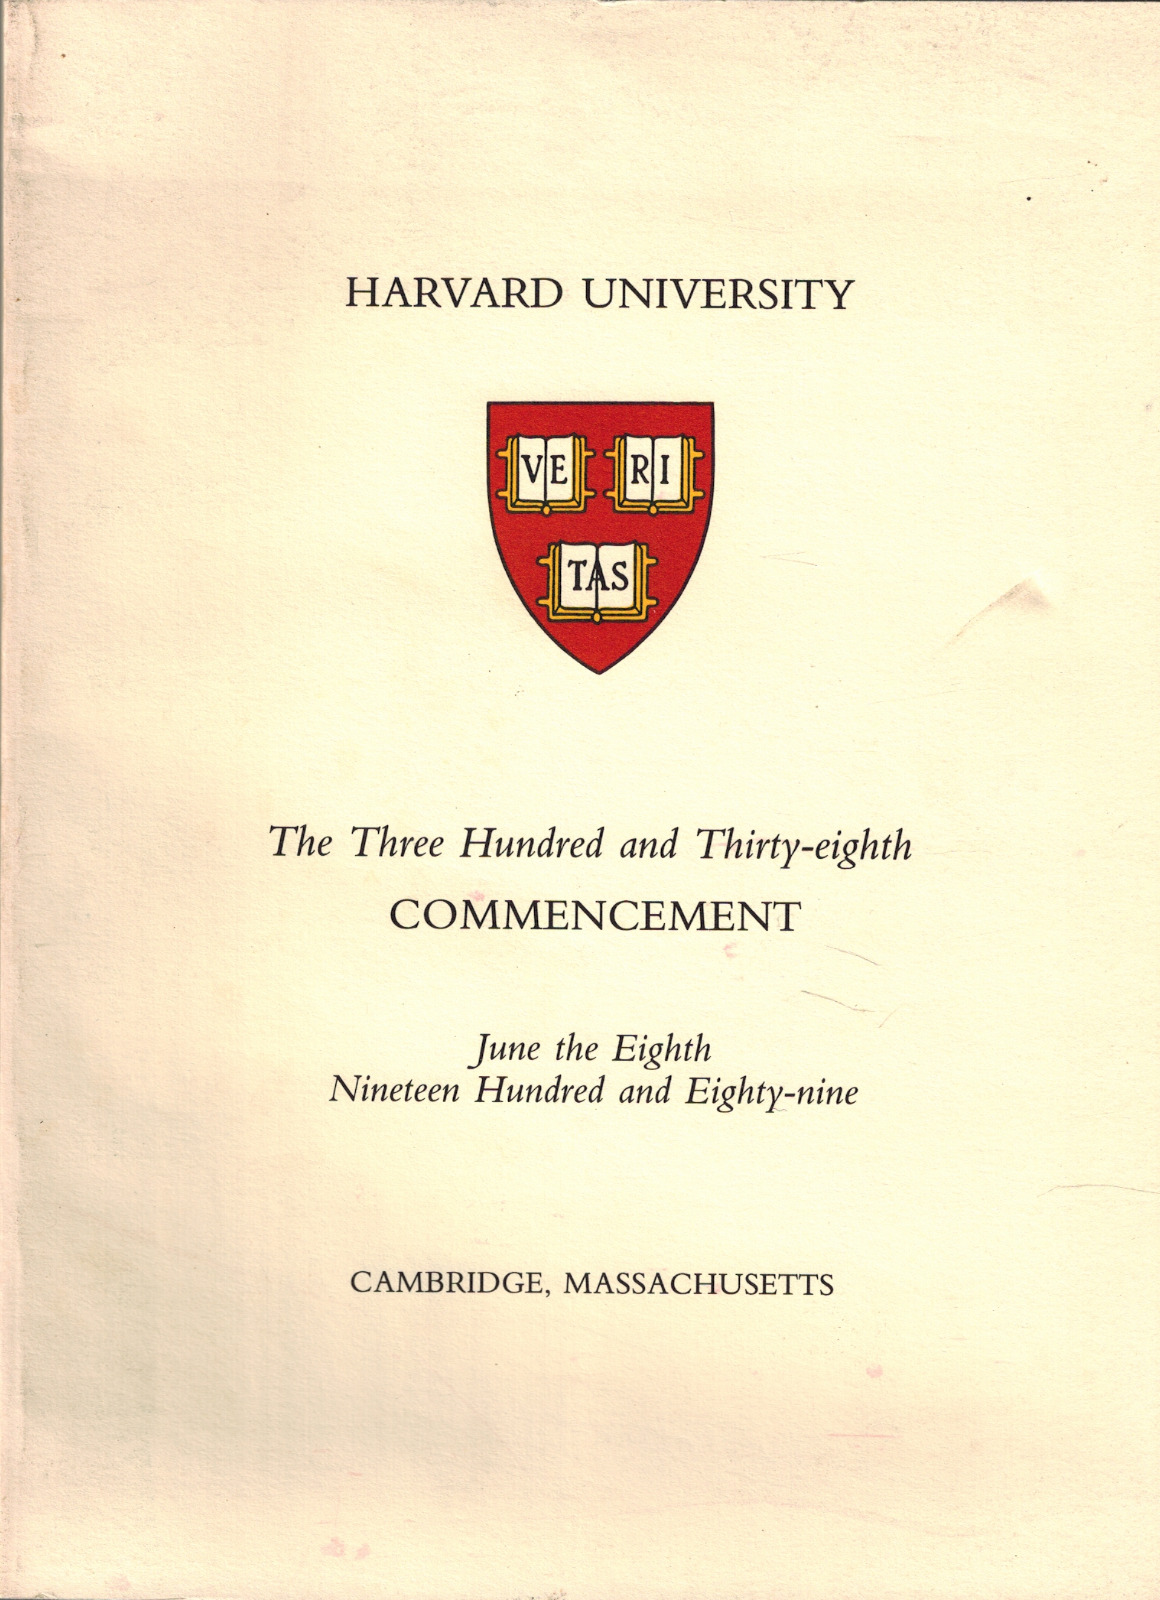 Harvard University Three Hundred and Thirty-eighth Commencement, Class of 1989